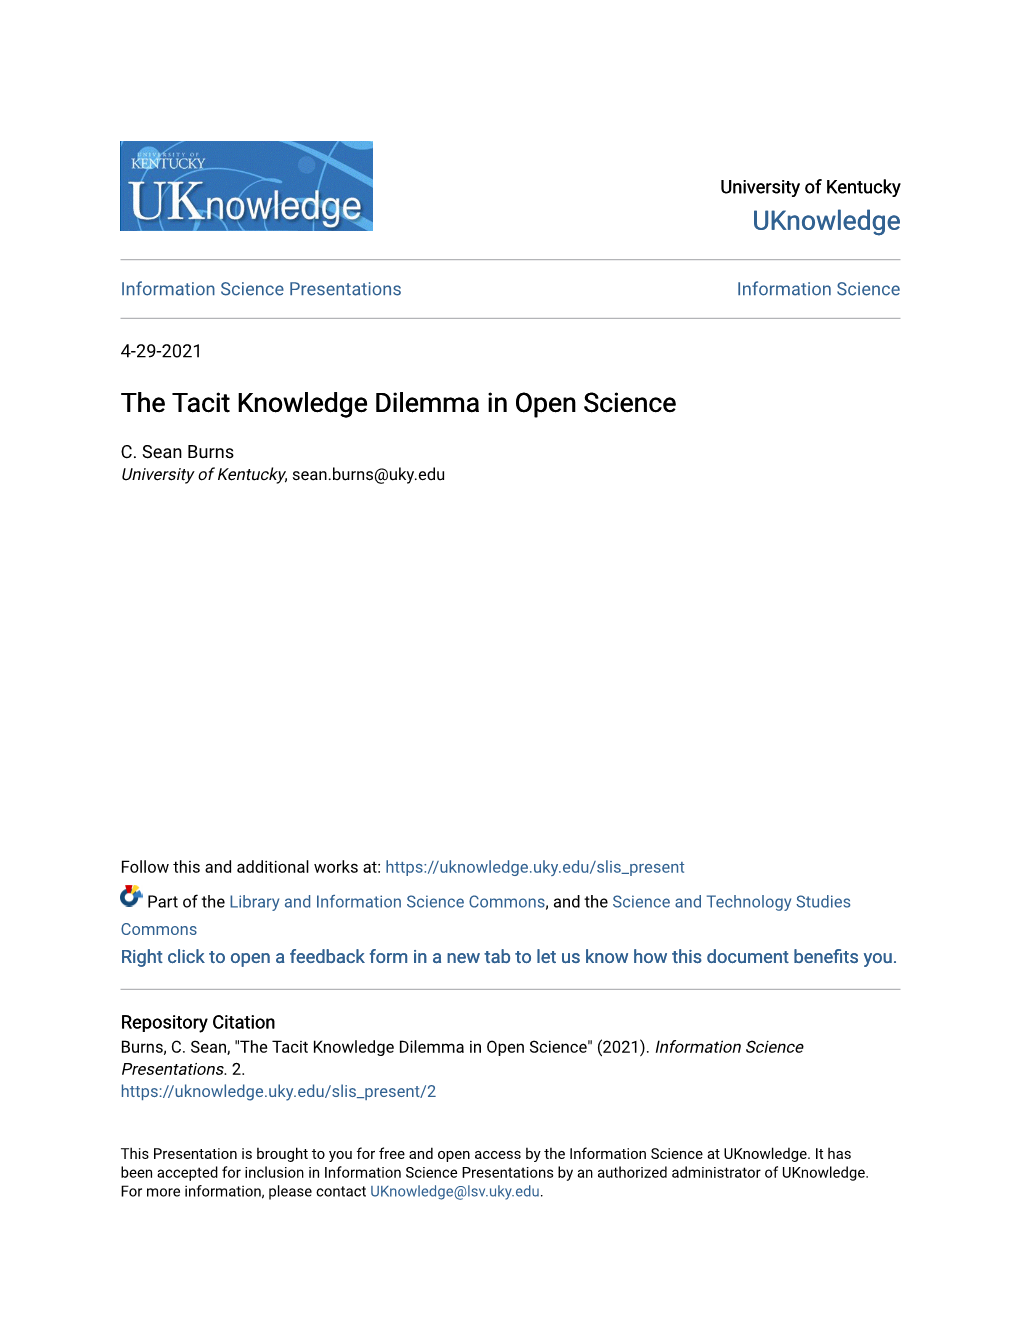 The Tacit Knowledge Dilemma in Open Science